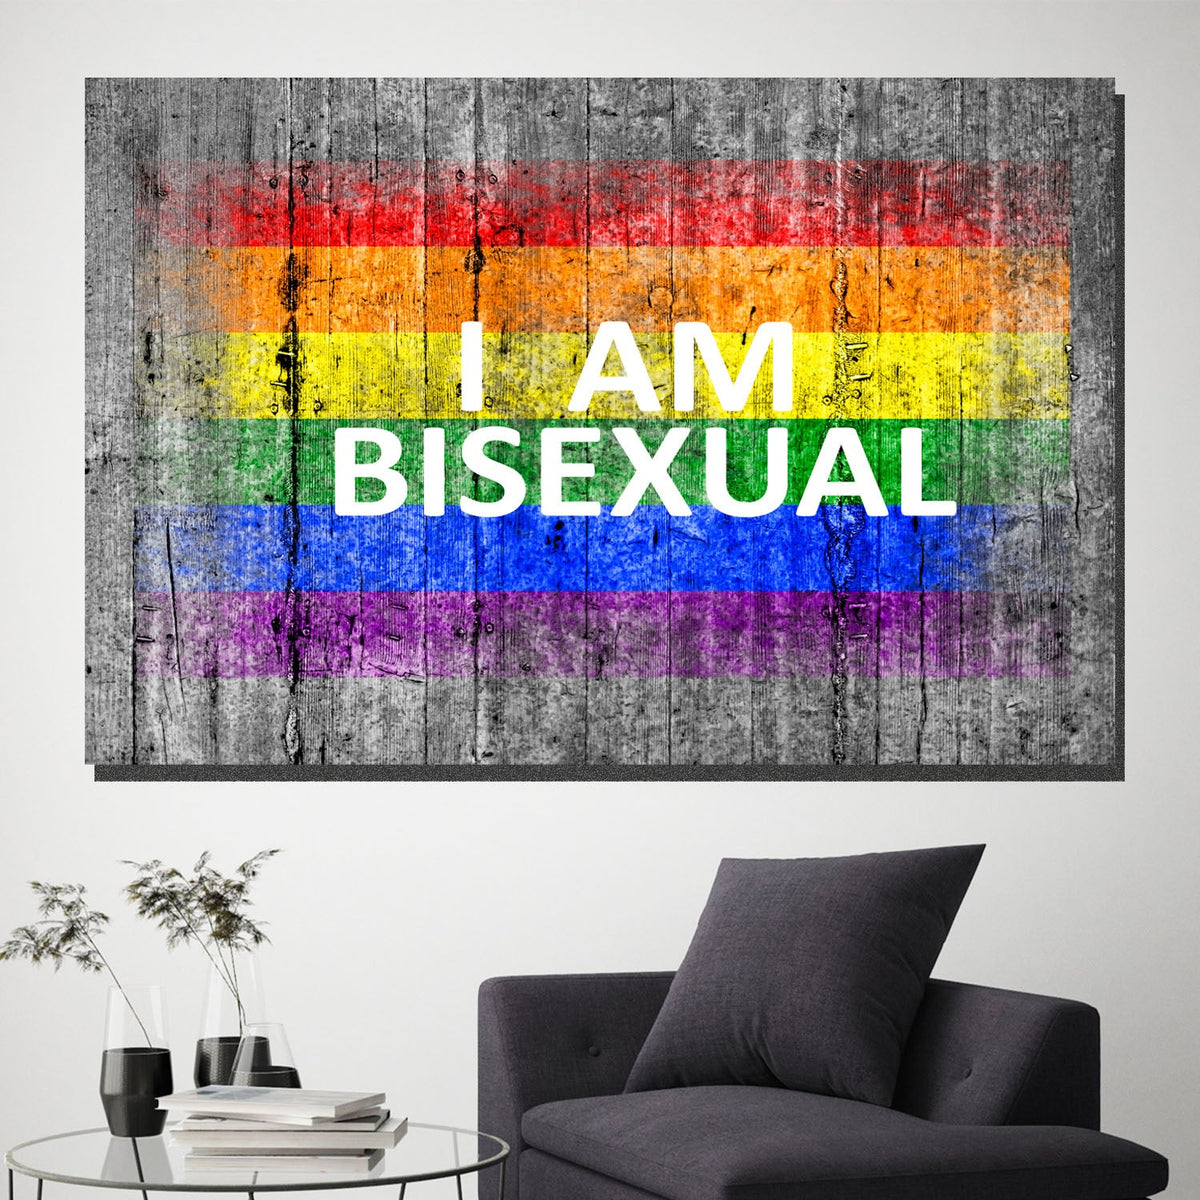 https://cdn.shopify.com/s/files/1/0387/9986/8044/products/IamBisexualCanvasArtprintStretched-4.jpg